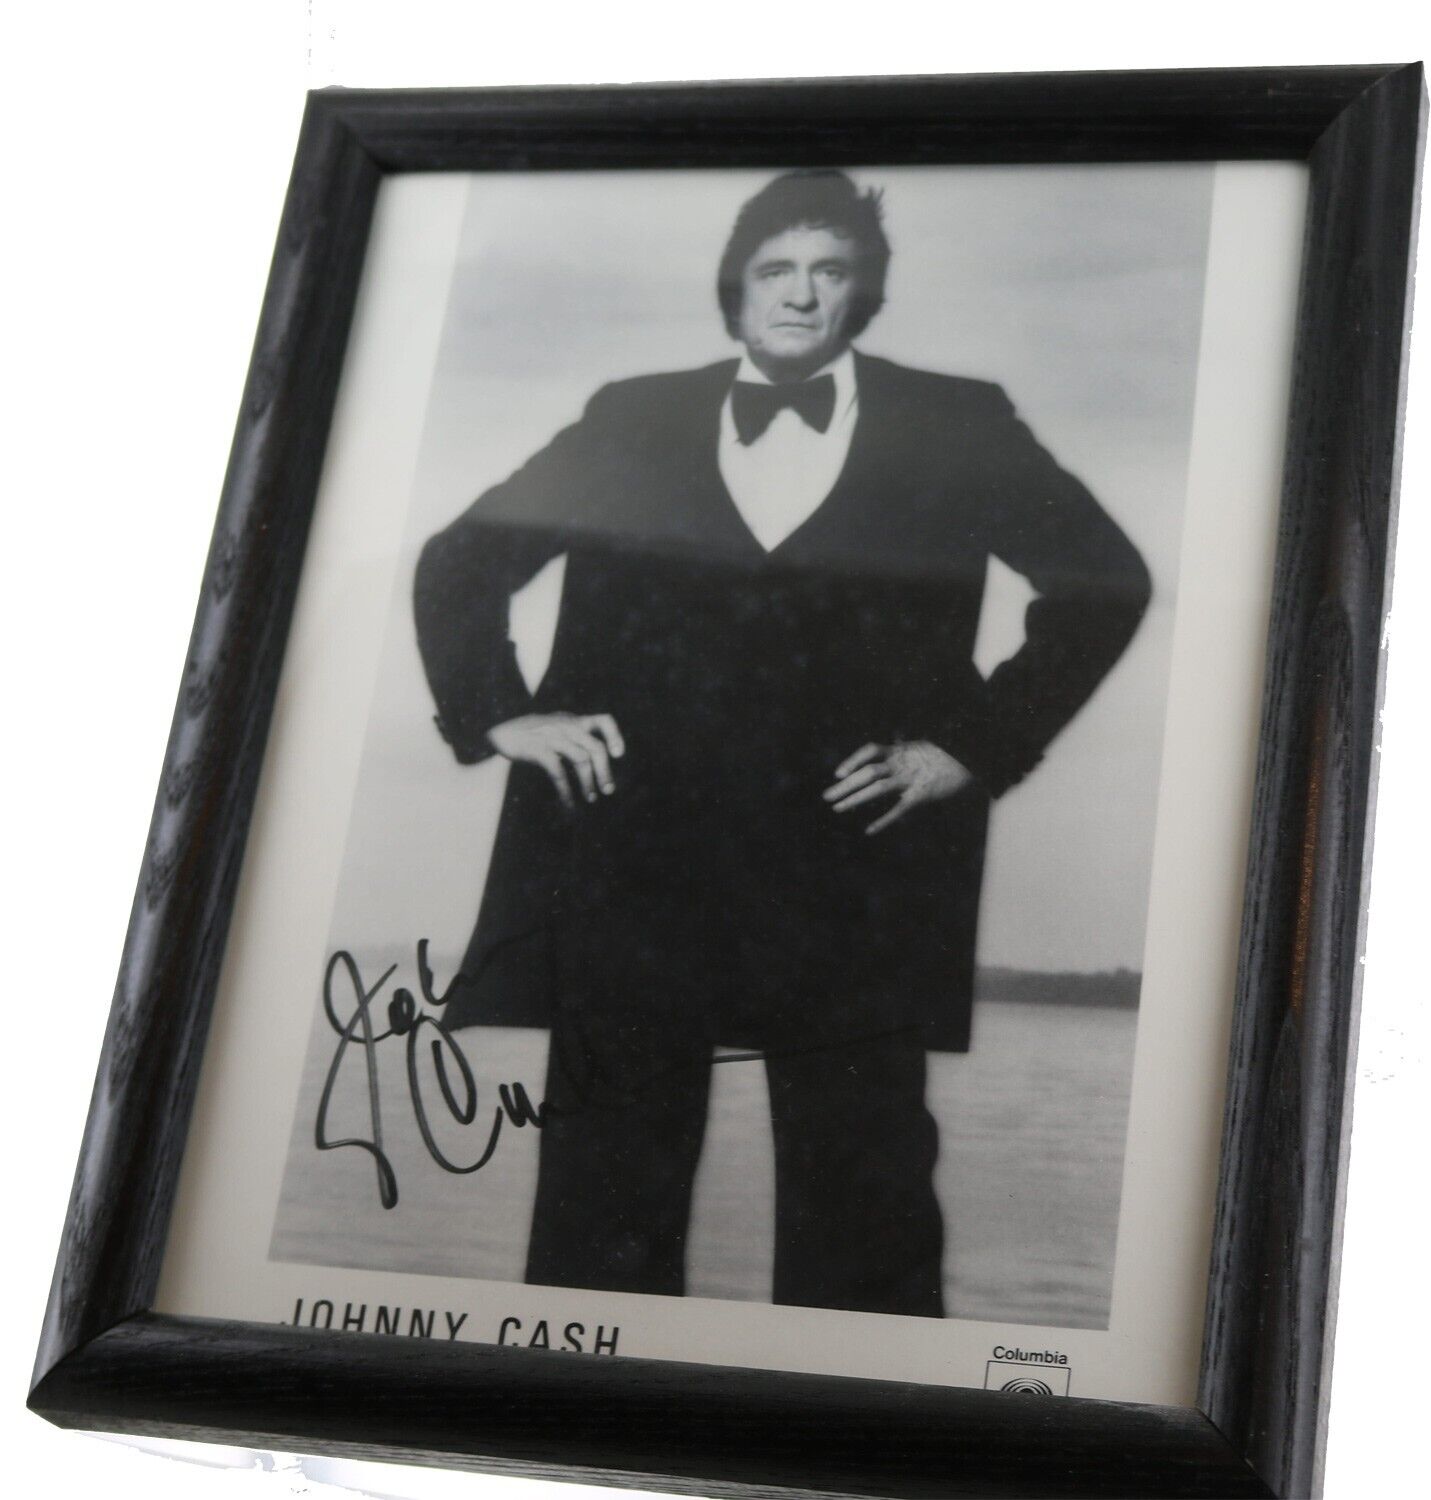 Framed Autographed Picture of Johnny Cash.